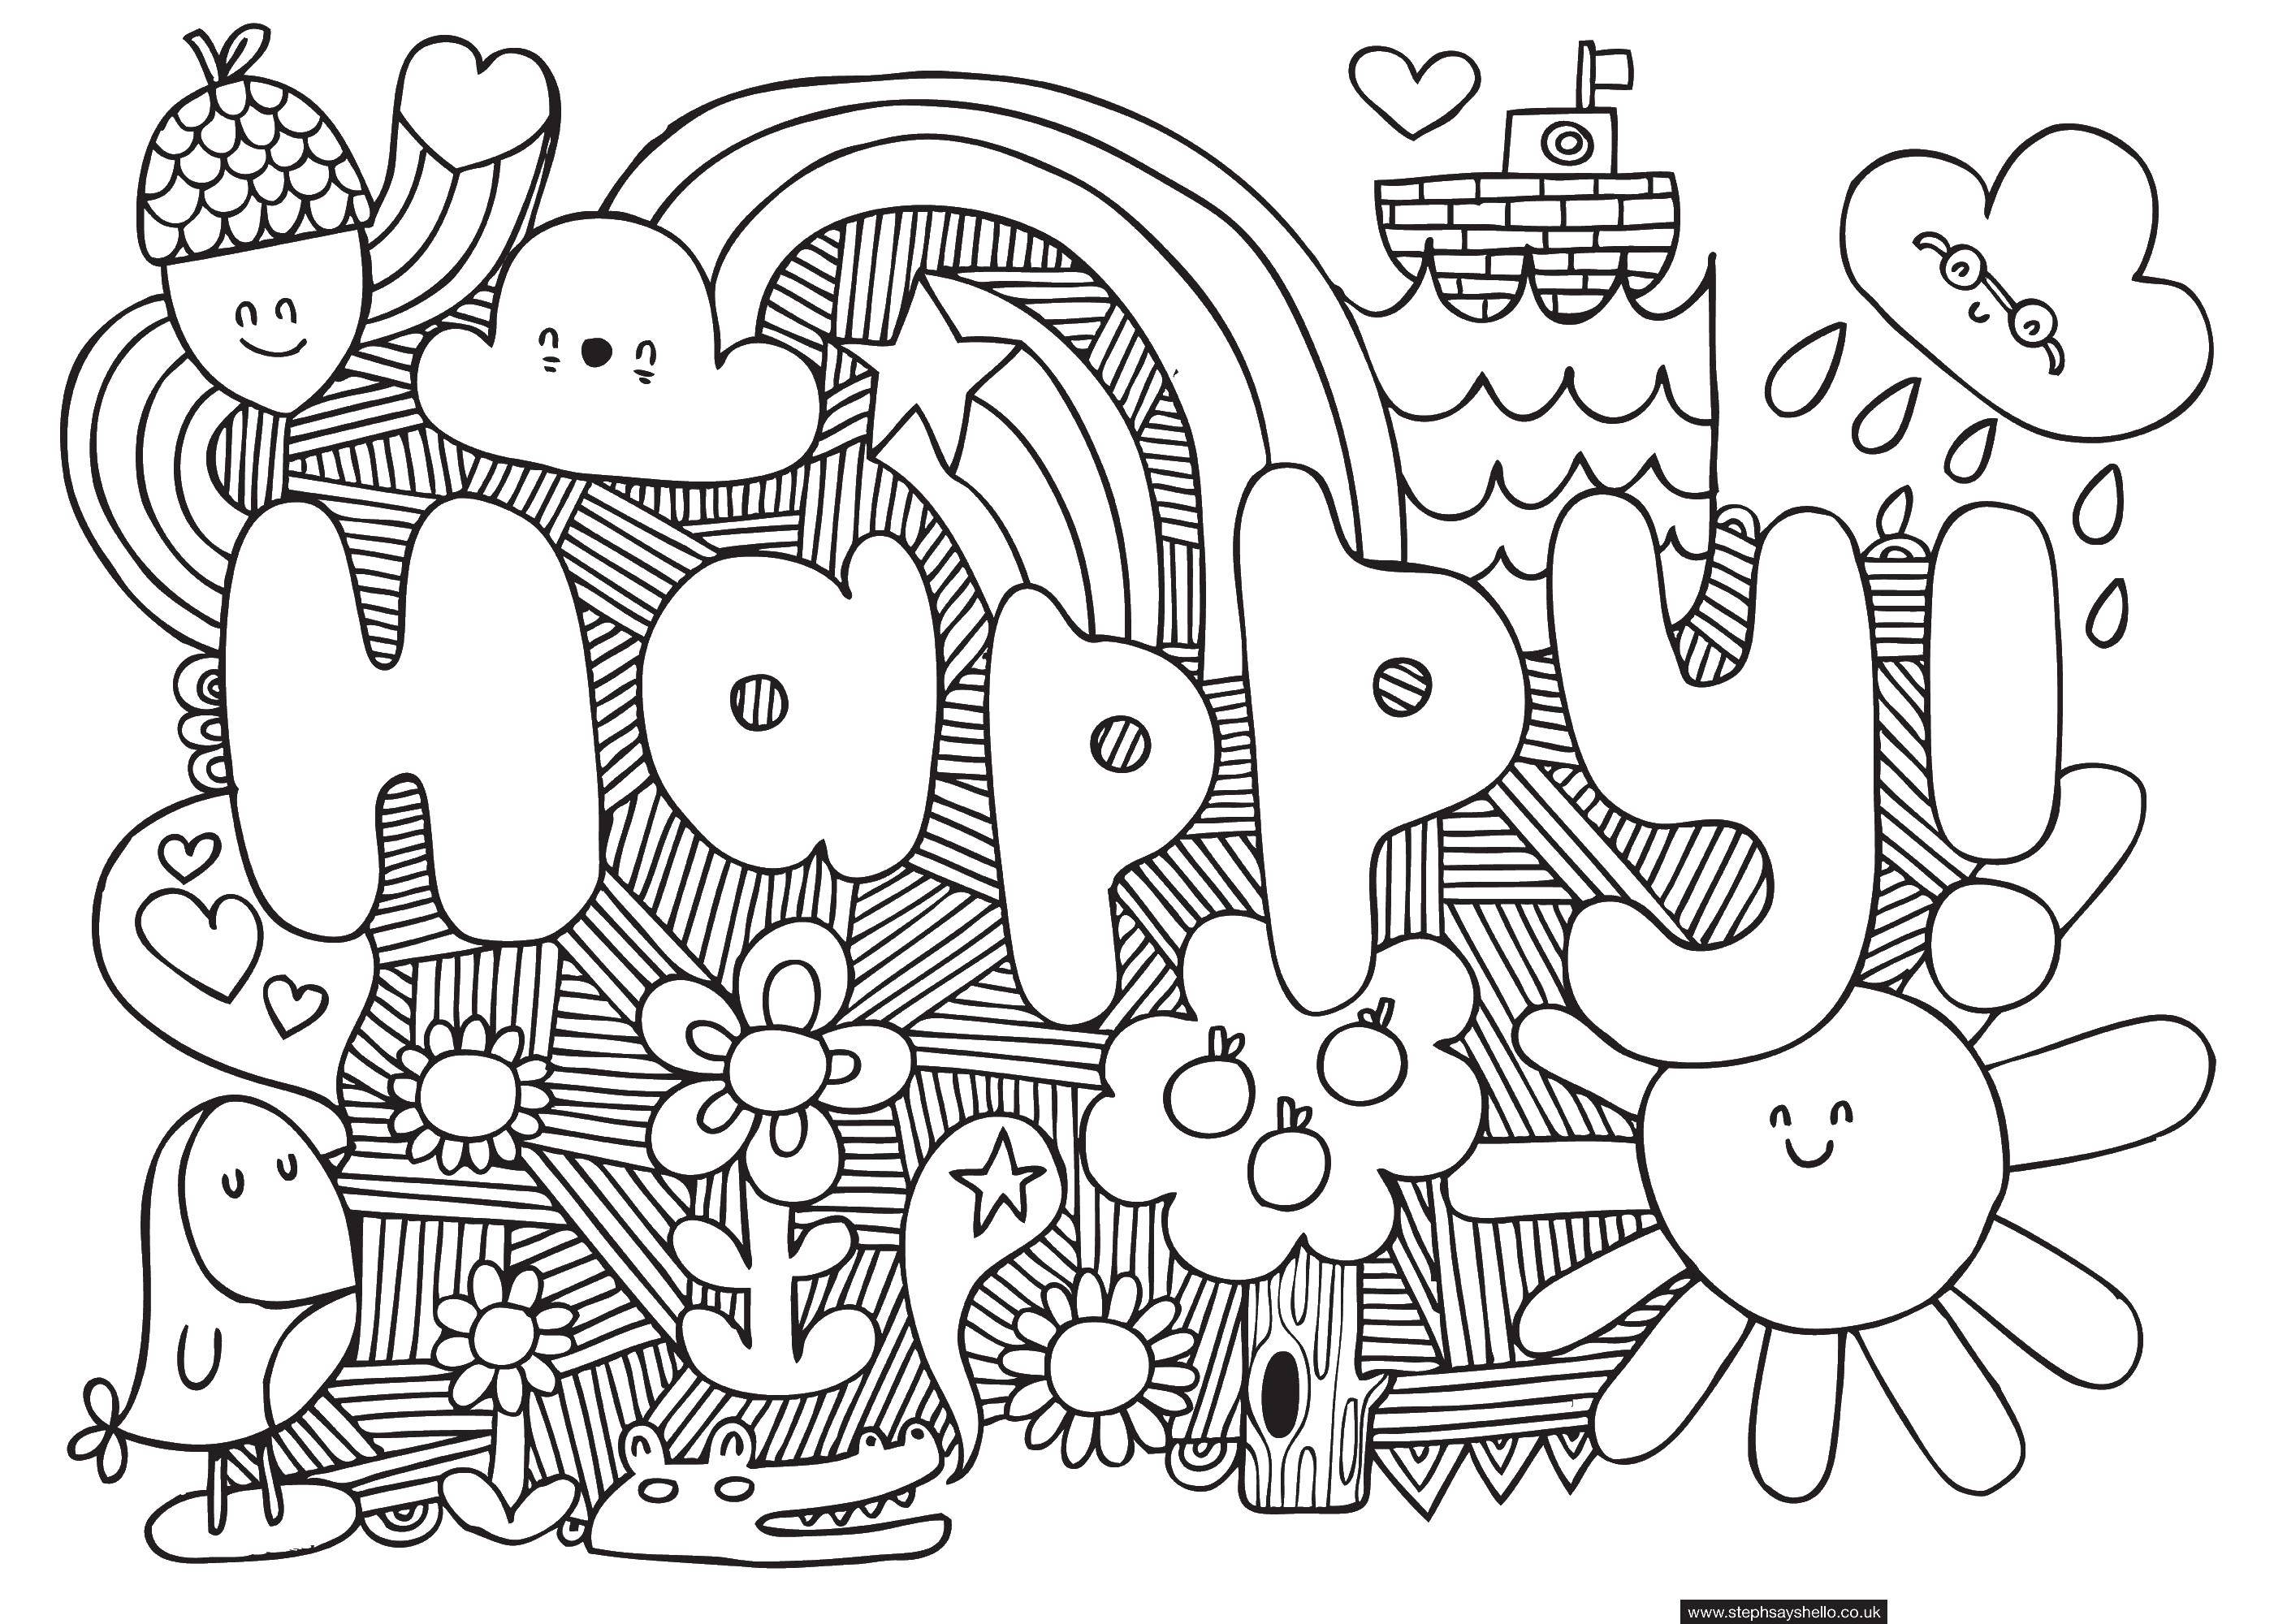 Coloring Happy. Category English words. Tags:  happy words.